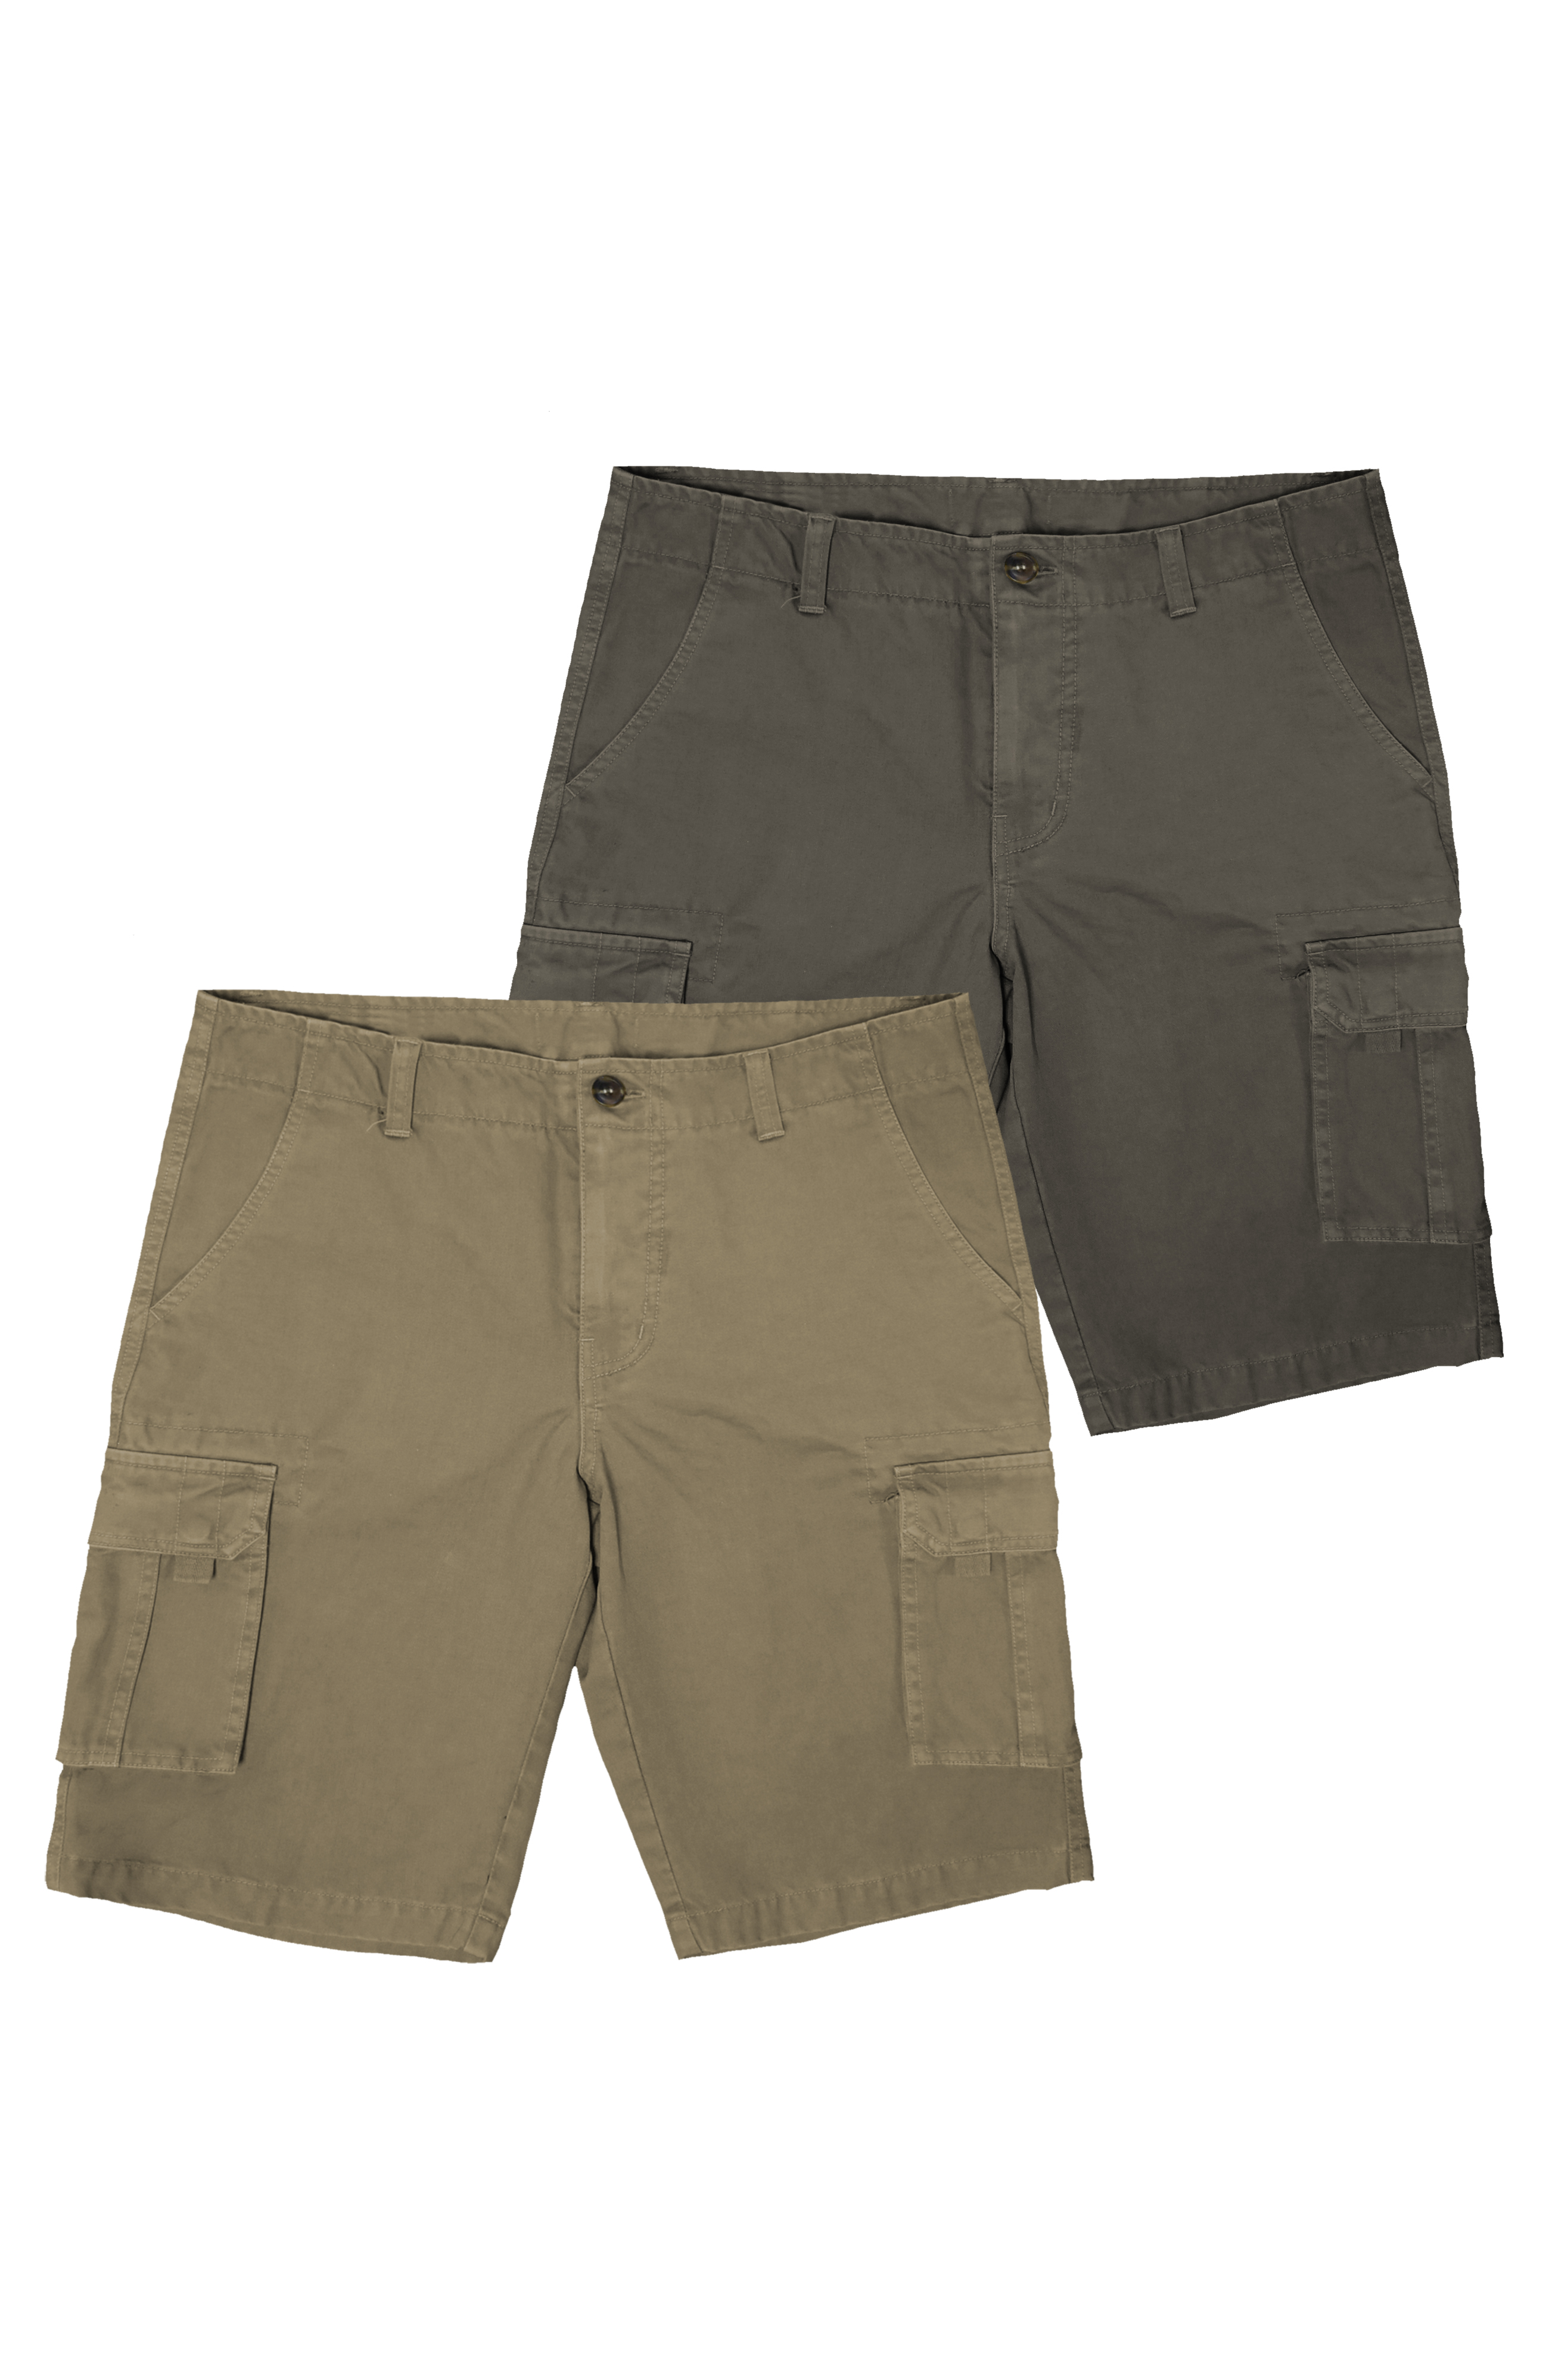 Victory Outfitters Men's Cotton Twill Cargo Shorts 2 Pack - Khaki ...